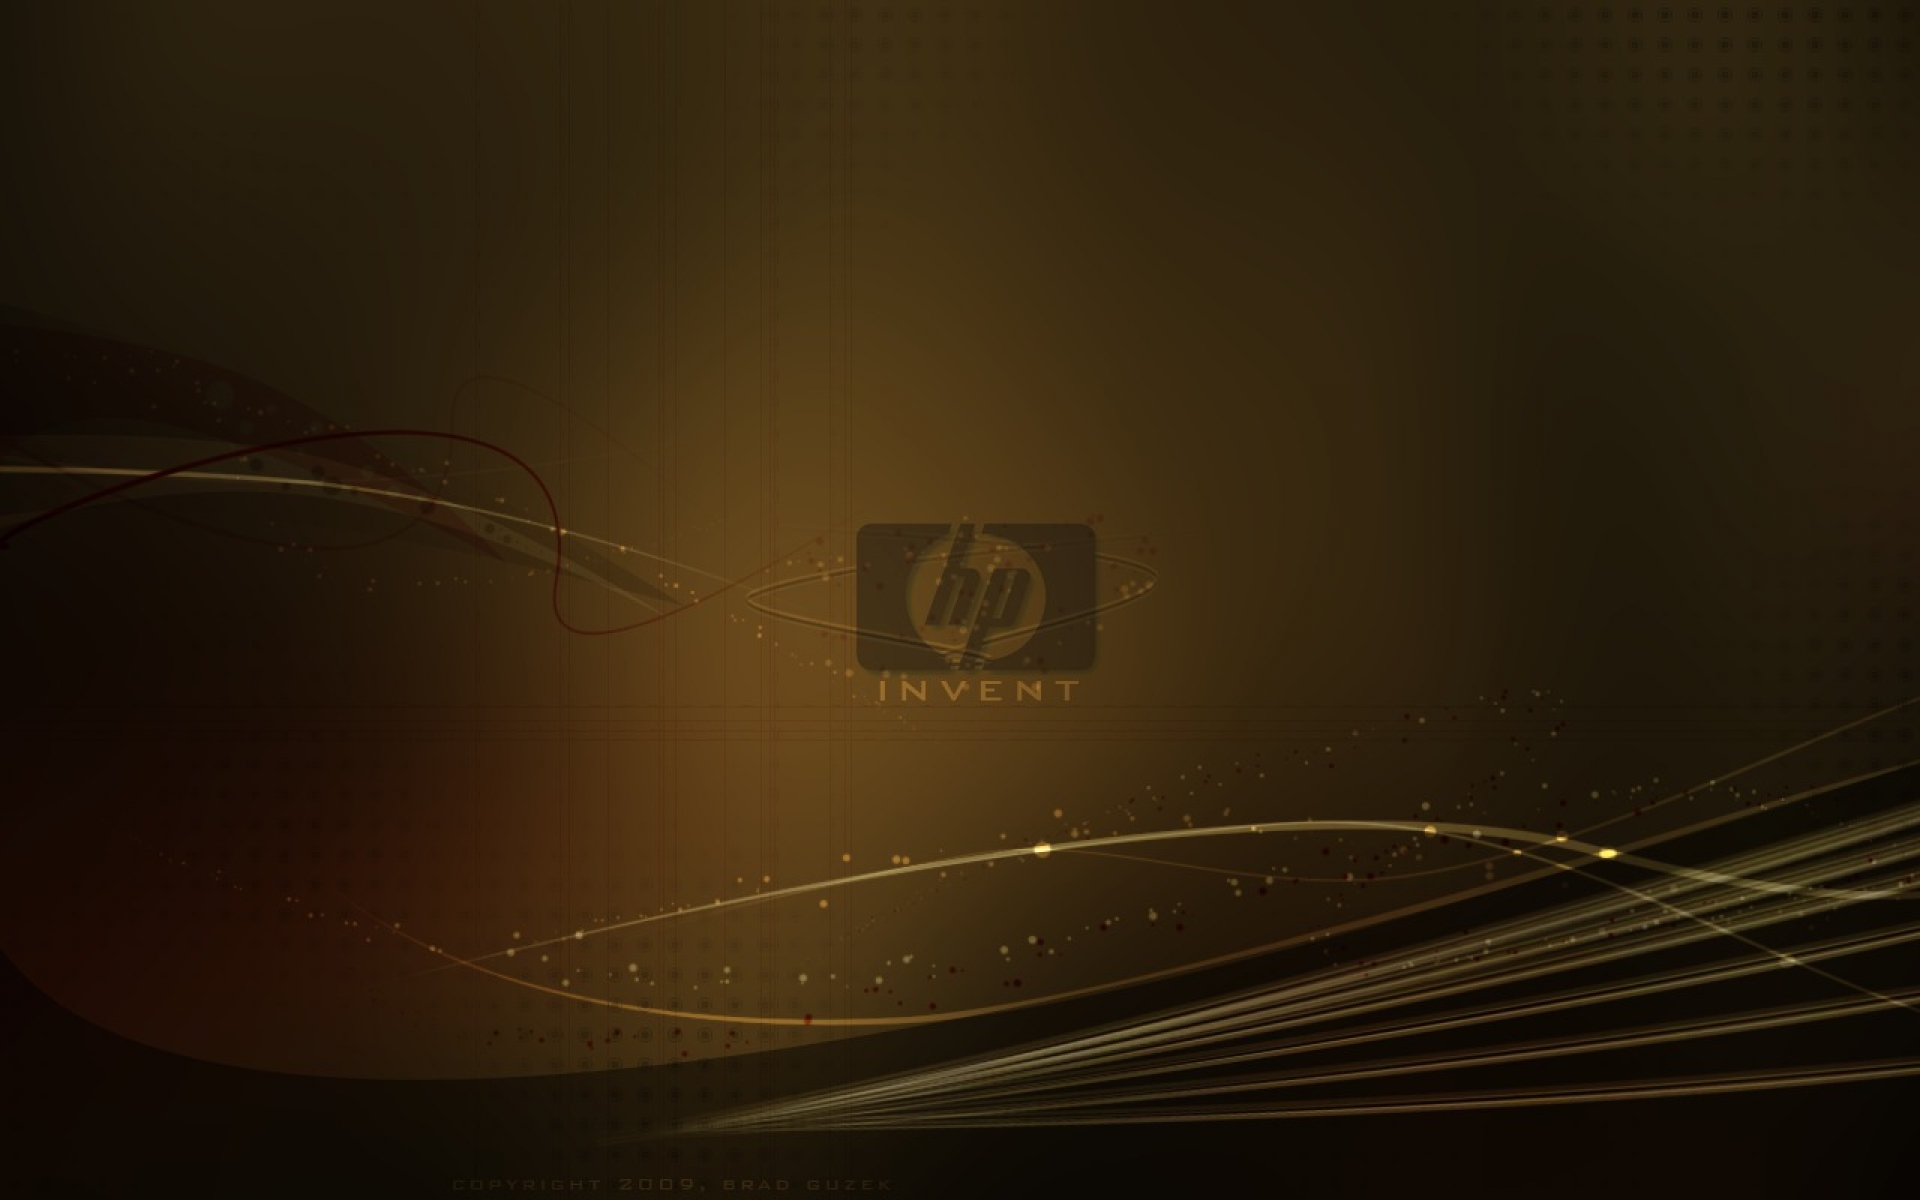 Hp Pavilion Wallpaper Image In Collection